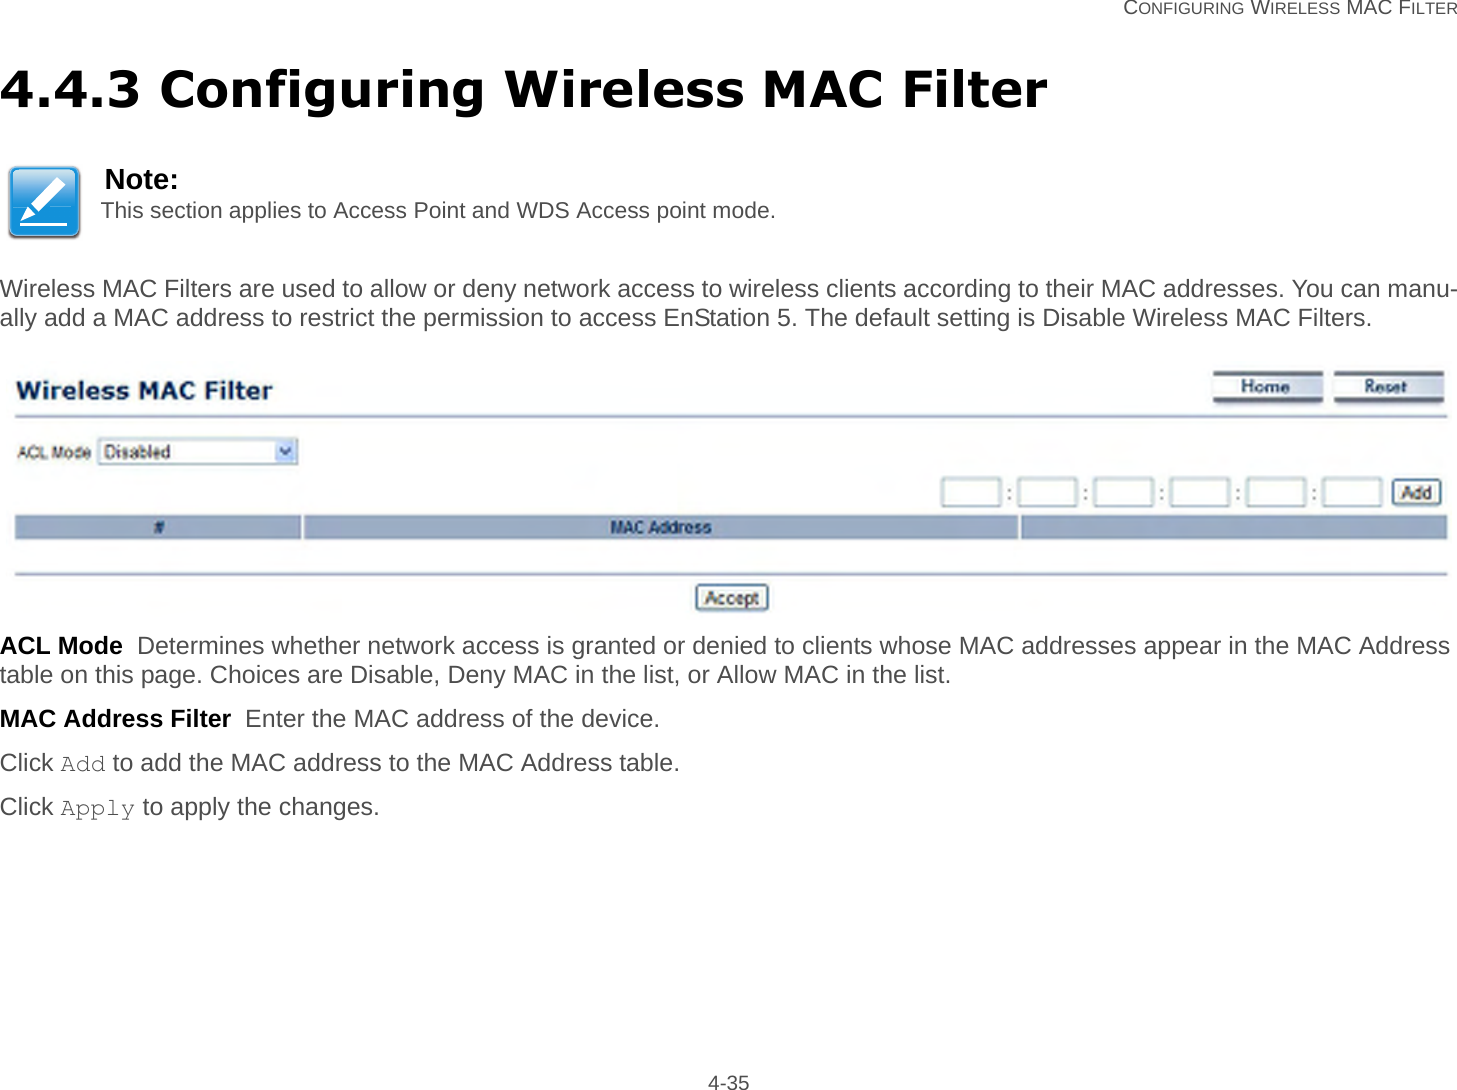   CONFIGURING WIRELESS MAC FILTER 4-354.4.3 Configuring Wireless MAC FilterWireless MAC Filters are used to allow or deny network access to wireless clients according to their MAC addresses. You can manu-ally add a MAC address to restrict the permission to access EnStation 5. The default setting is Disable Wireless MAC Filters.ACL Mode  Determines whether network access is granted or denied to clients whose MAC addresses appear in the MAC Address table on this page. Choices are Disable, Deny MAC in the list, or Allow MAC in the list.MAC Address Filter  Enter the MAC address of the device.Click Add to add the MAC address to the MAC Address table.Click Apply to apply the changes.Note:This section applies to Access Point and WDS Access point mode.